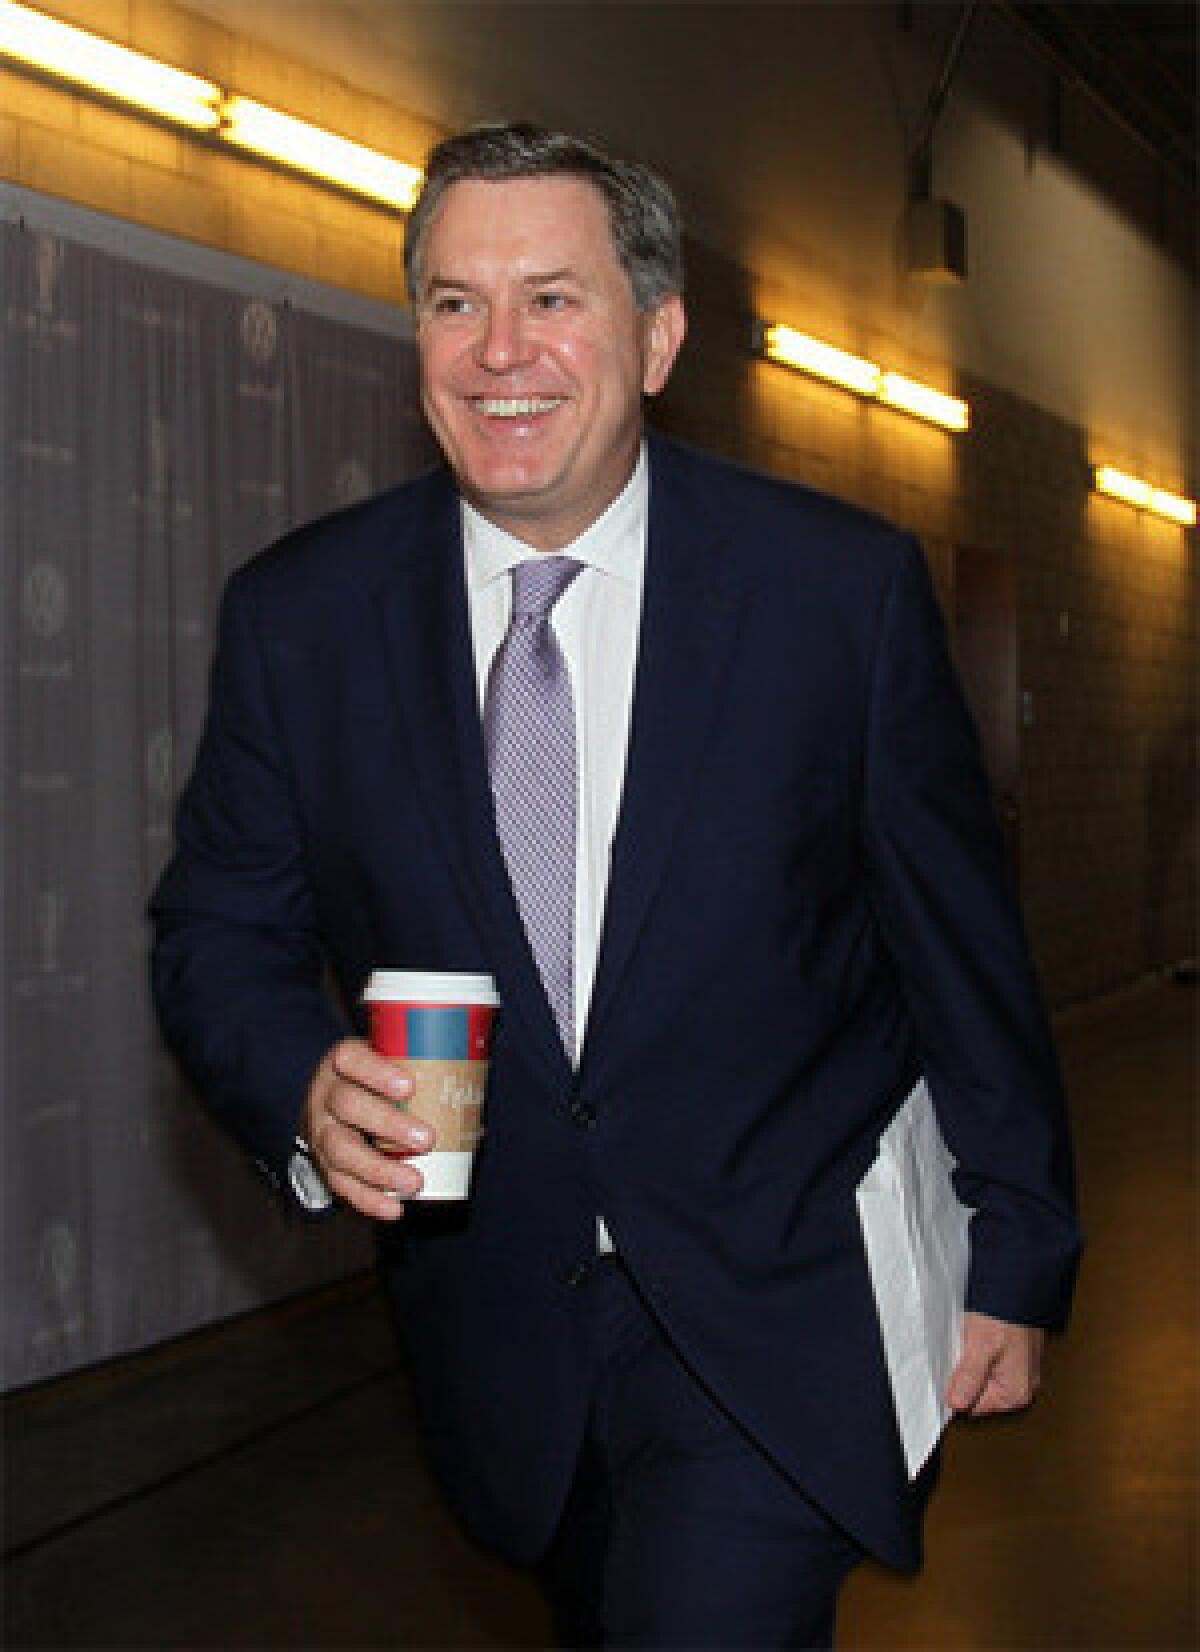 Tim Leiweke is the former president and chief executive officer of AEG.